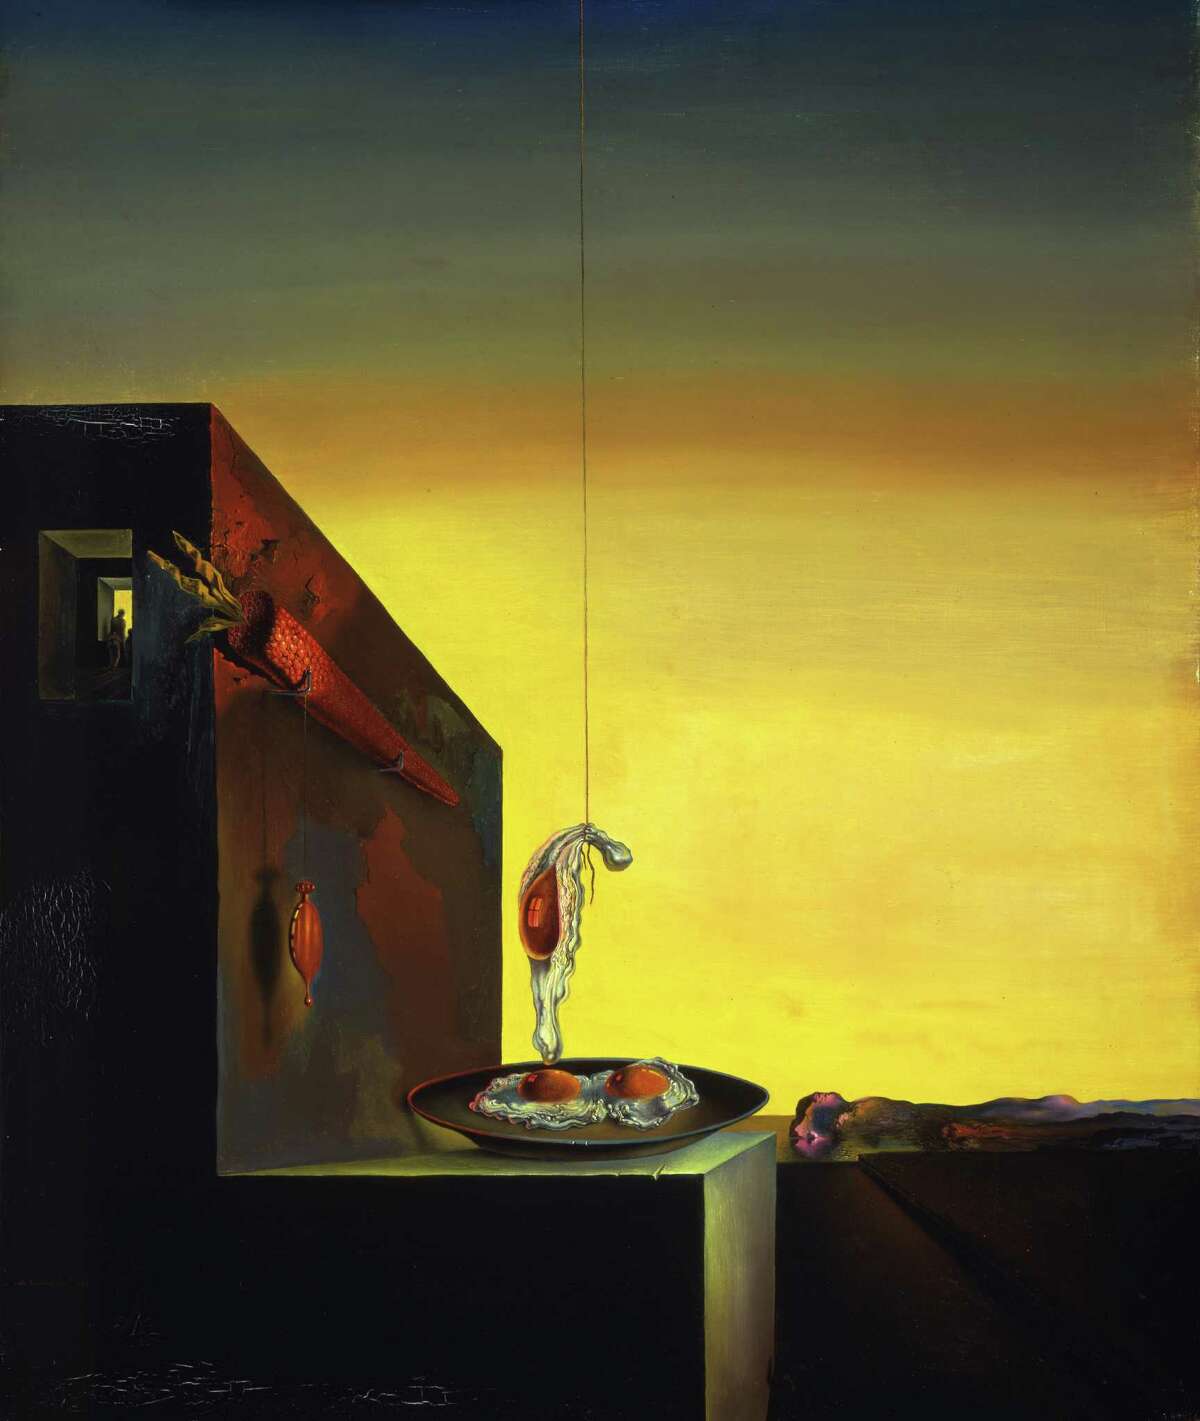 Salvador Dalí's painting "Eggs on the Plate Without the Plate" will be on display at the Menil Collection as part of a special exhibit featuring 30 works by Surrealist and contemporary artists.